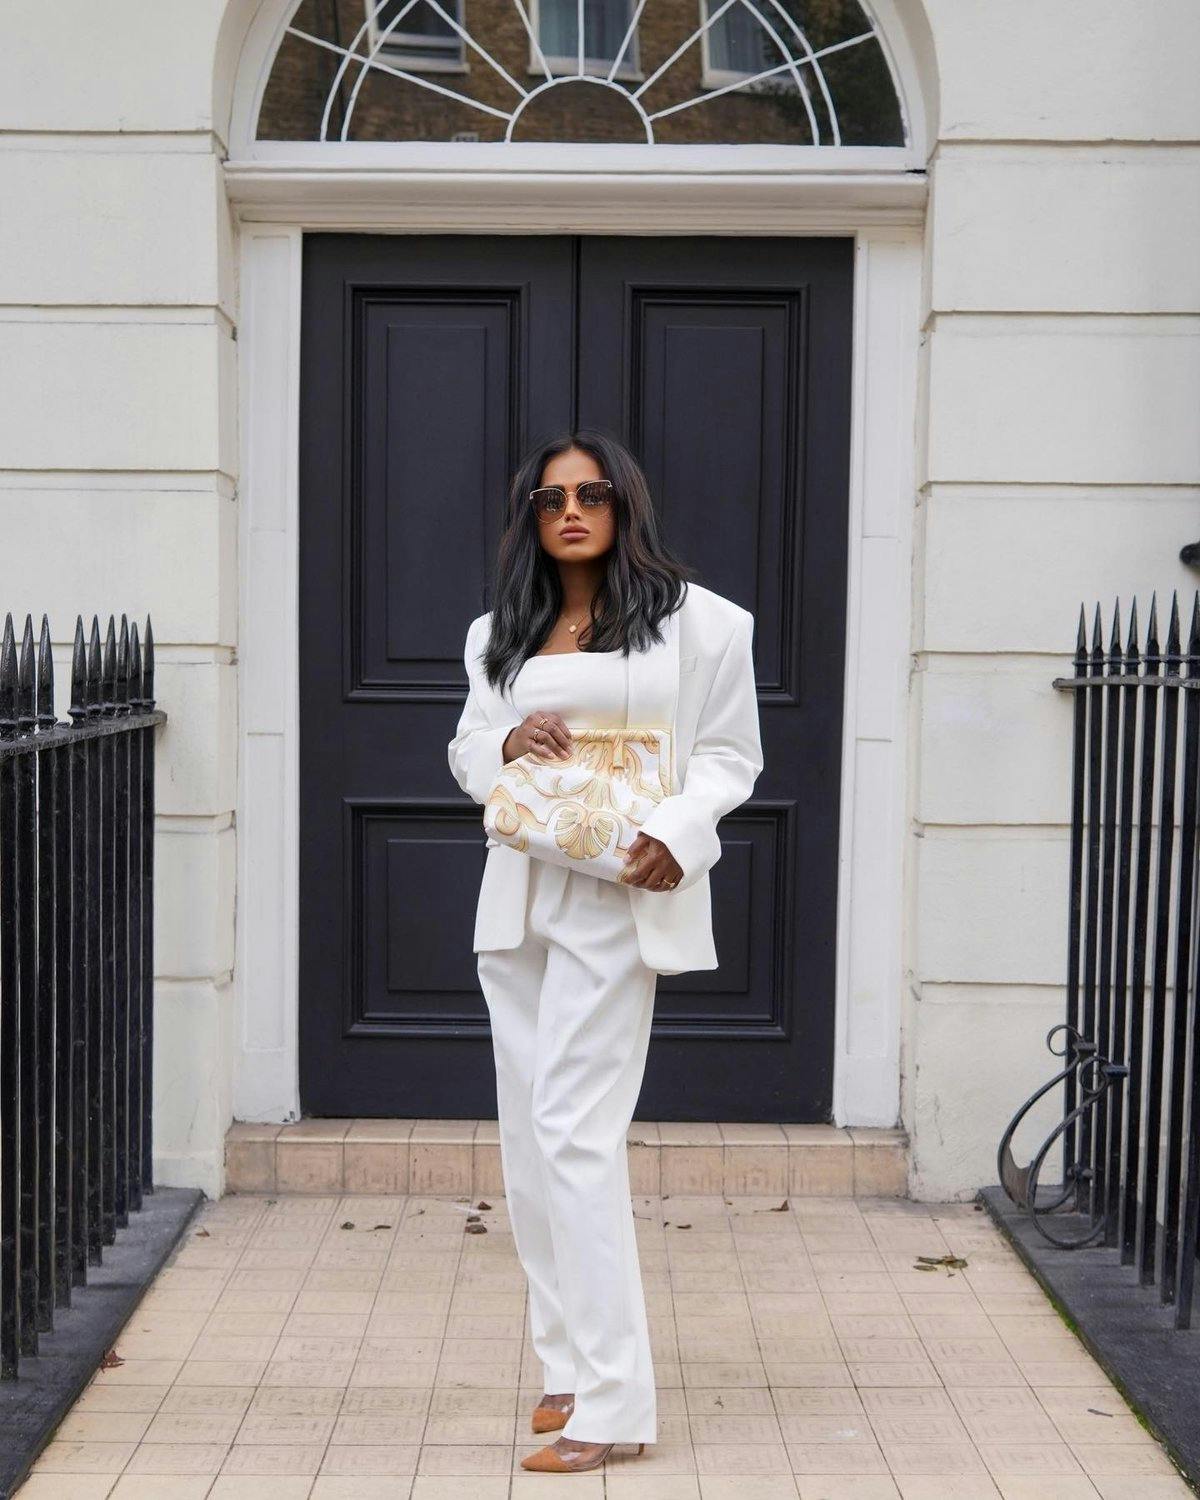 Sachini wearing a white suit and a fendance bag